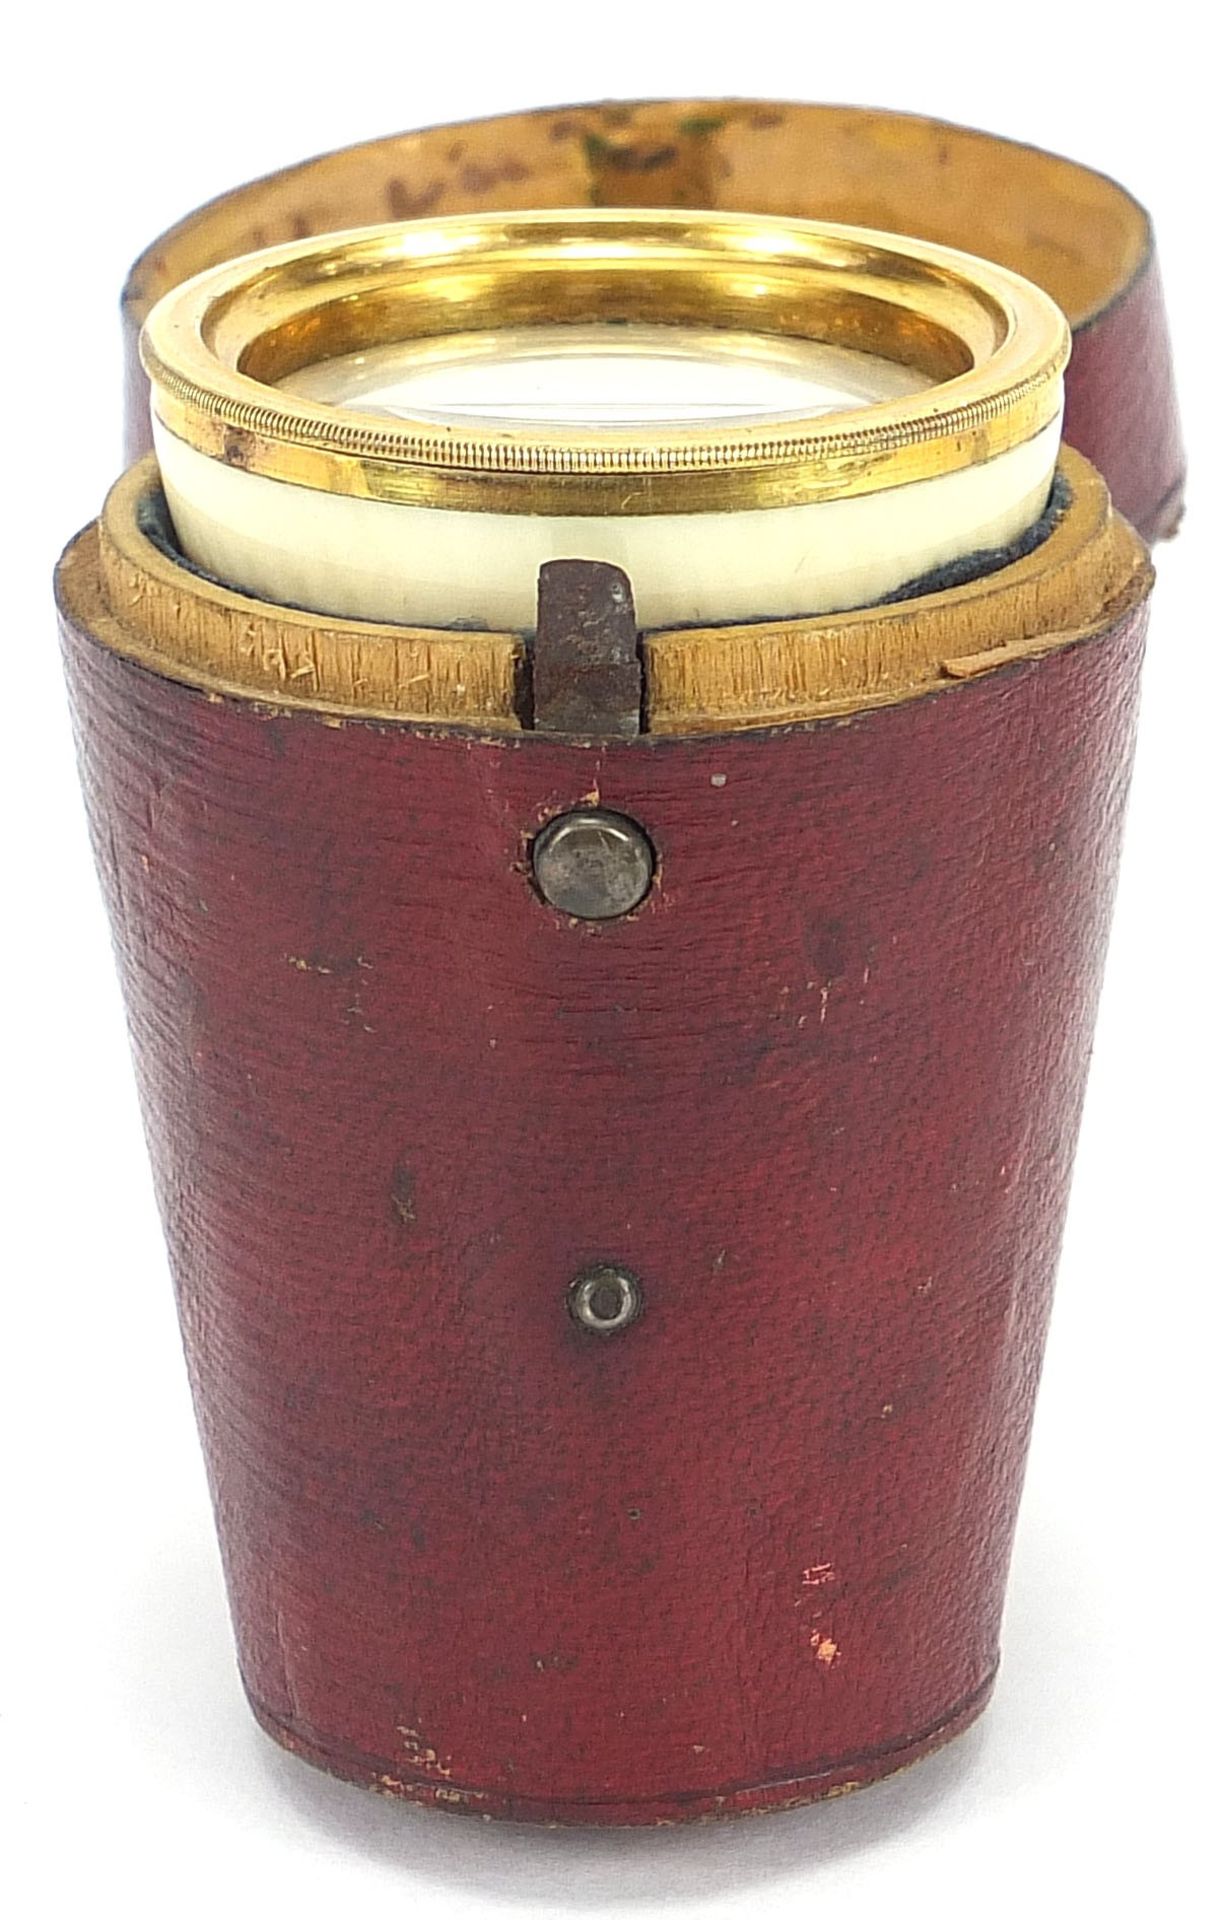 Dolland of London, early 19th century ivory and brass monocular with silk lined leather case, 6. - Image 5 of 7